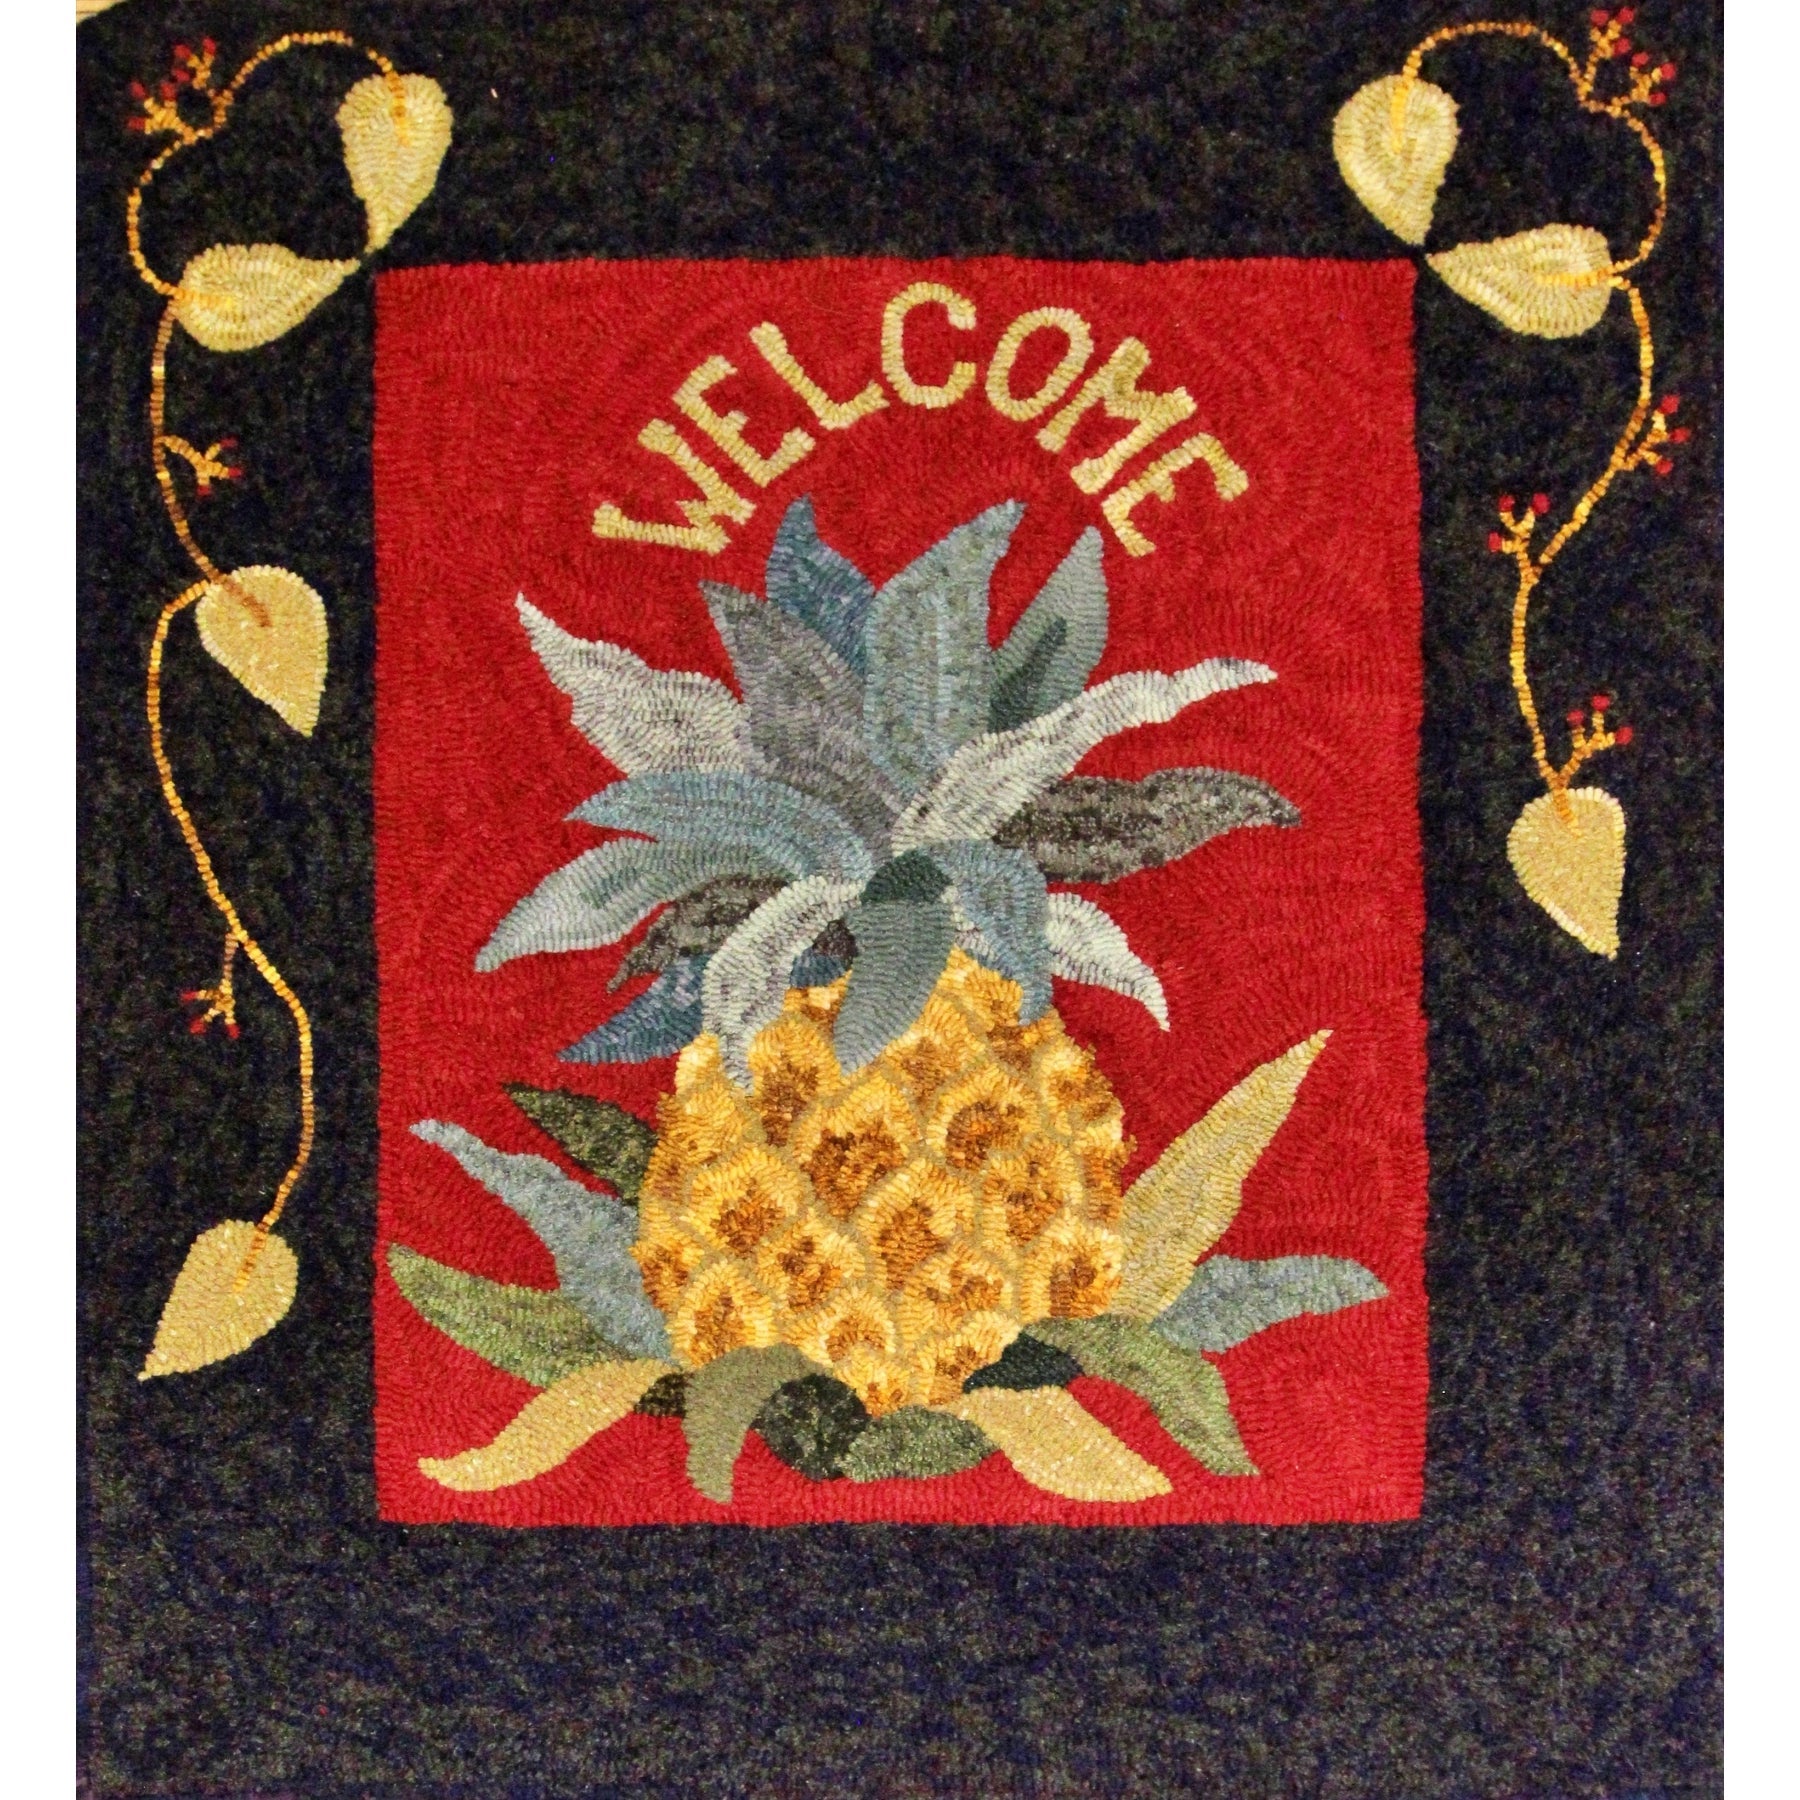 Welcome Pineapple - with Border, rug hooked by Cheryl Halliday